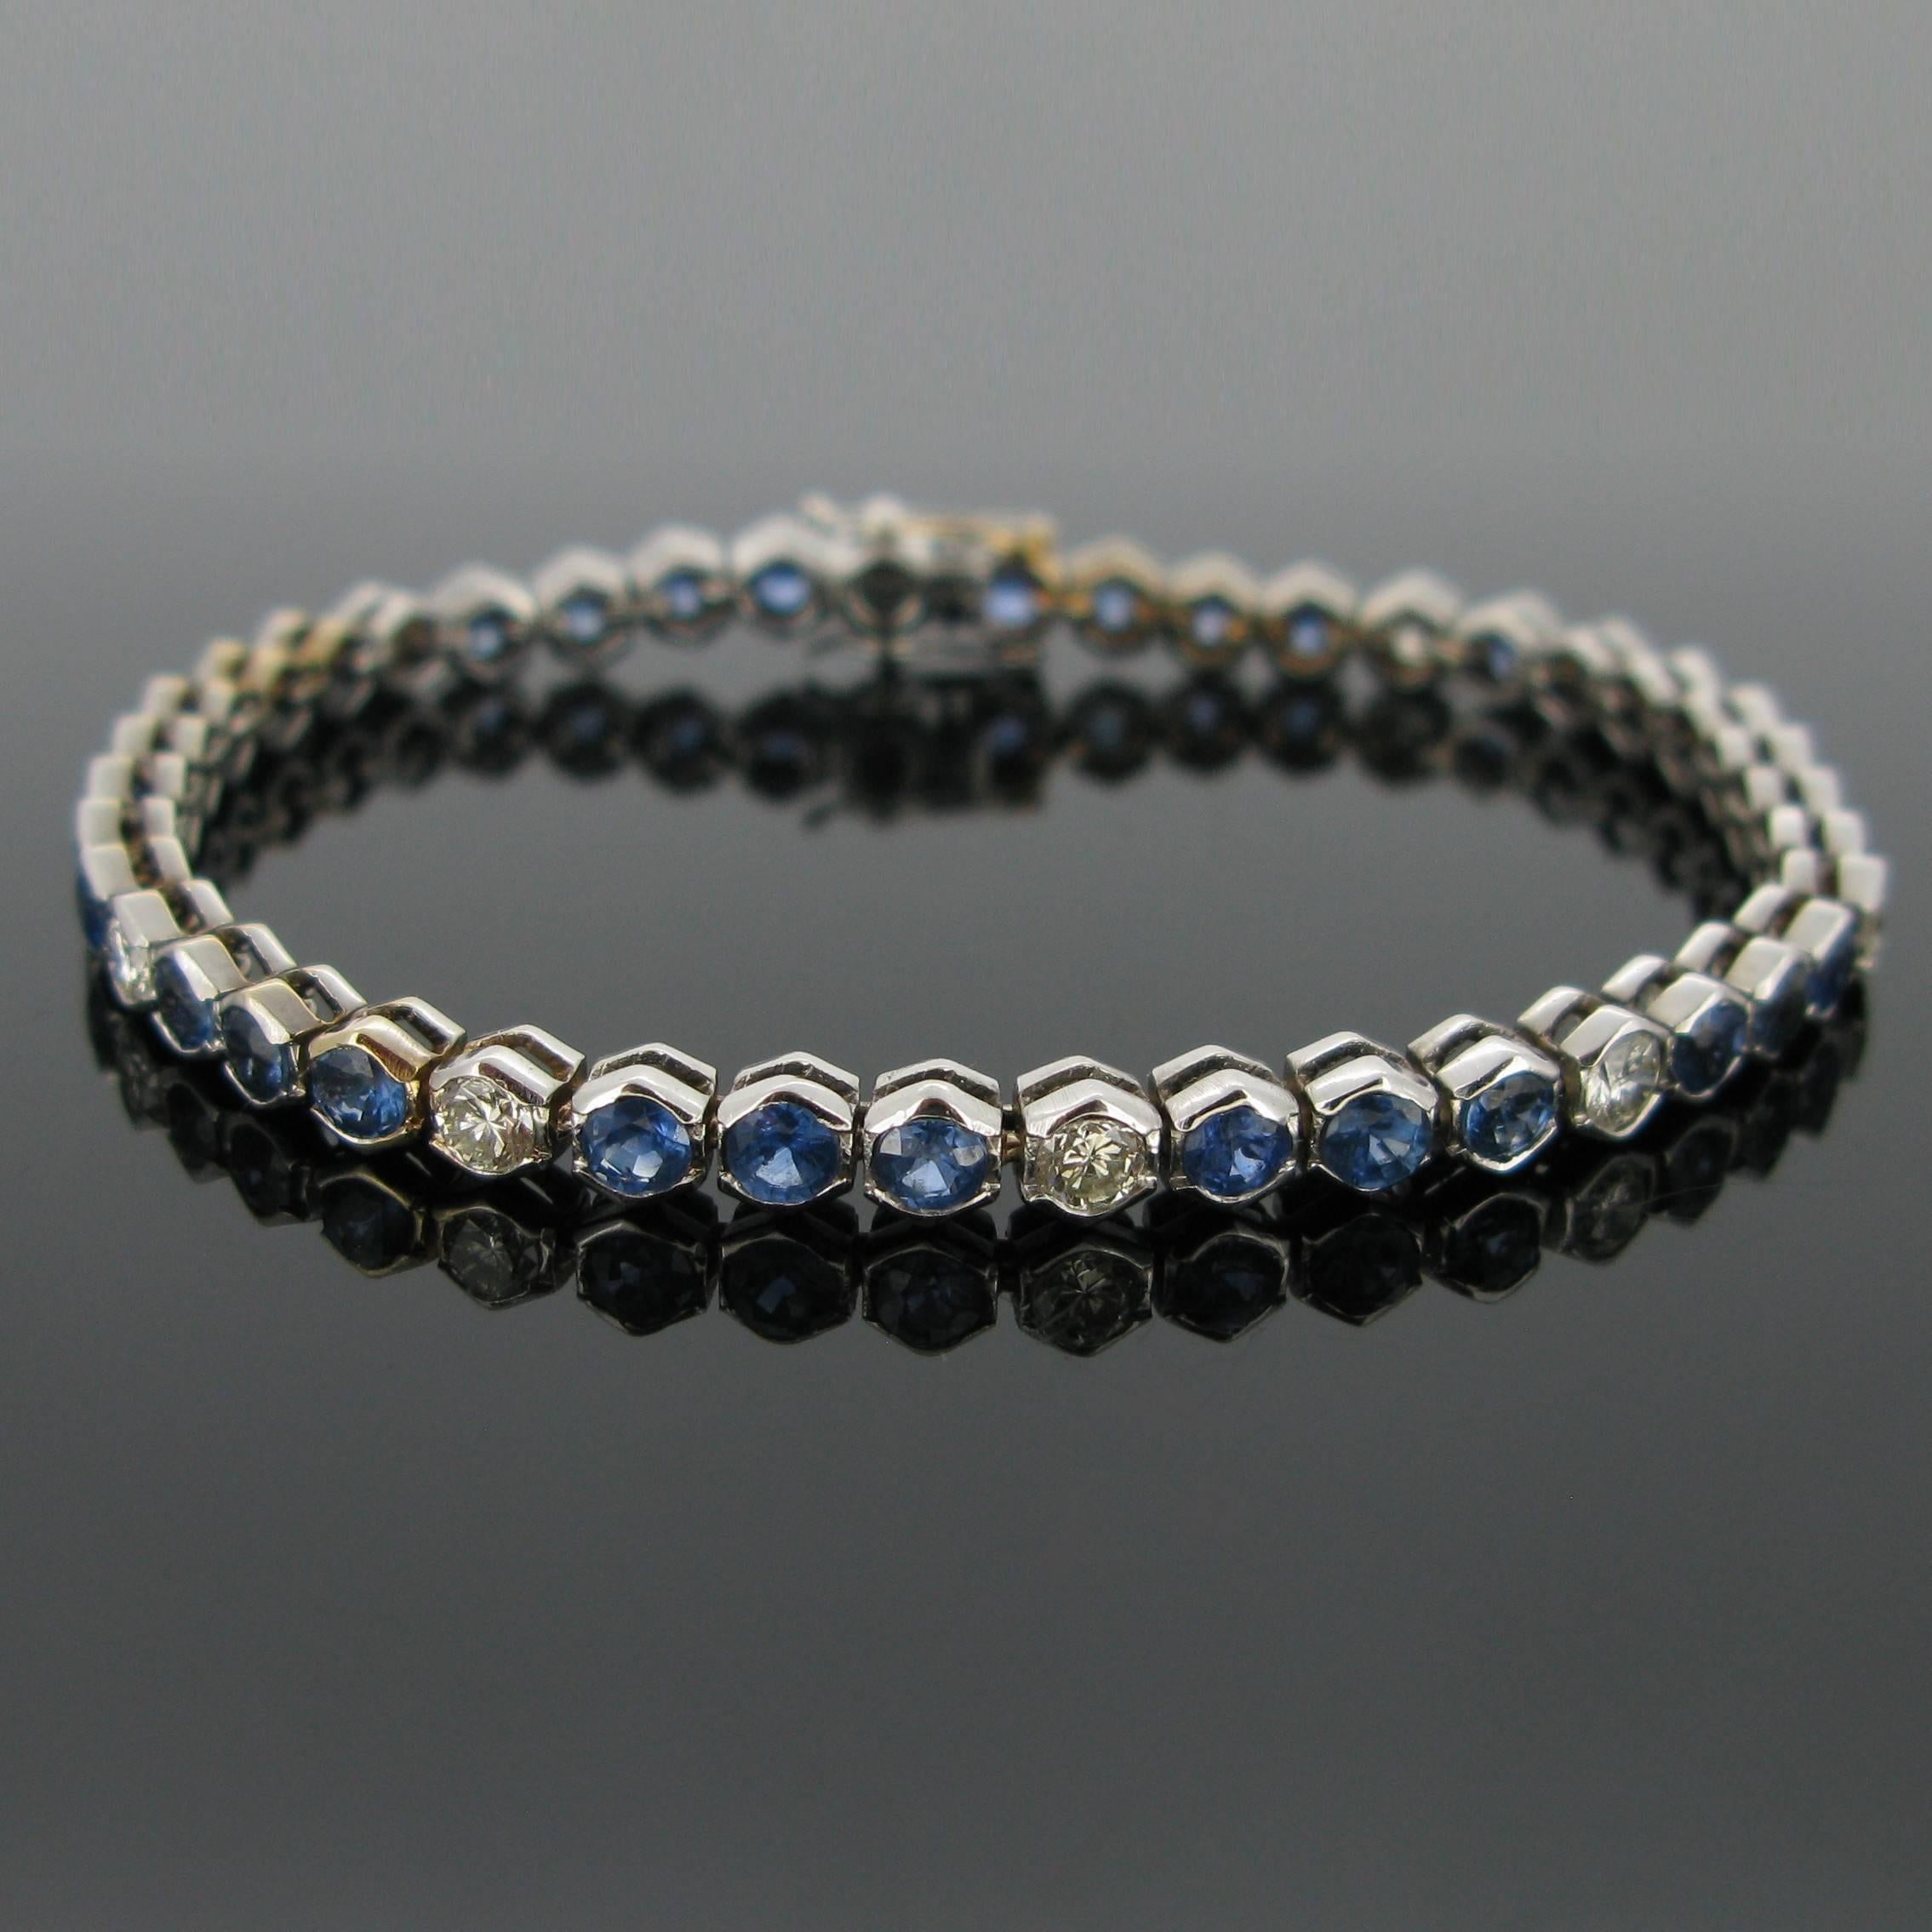 A sapphires and diamonds tennis bracelet. This timeless line is set with 10 brilliant cut diamonds (tcw : 1,20ct approximately) and with 32 sapphires for a total weighing around 6,40ct.  
The name Tennis Bracelet is related to a professional tennis